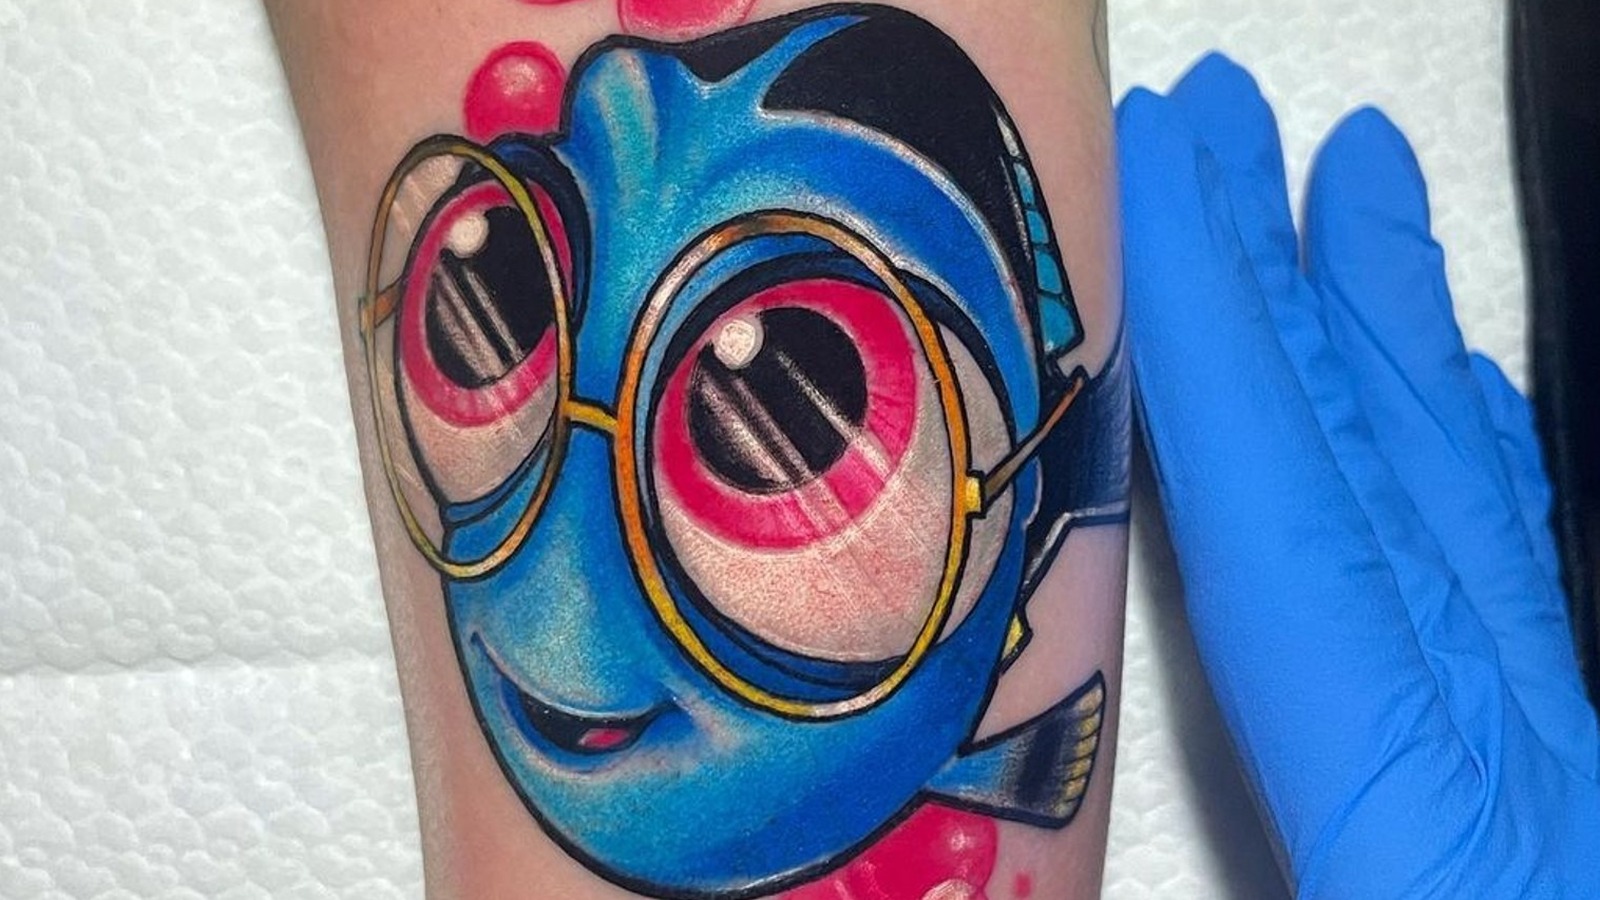 75 Killer New School Tattoos by Some of the Worlds Best Artists  Tattoo  Ideas Artists and Models